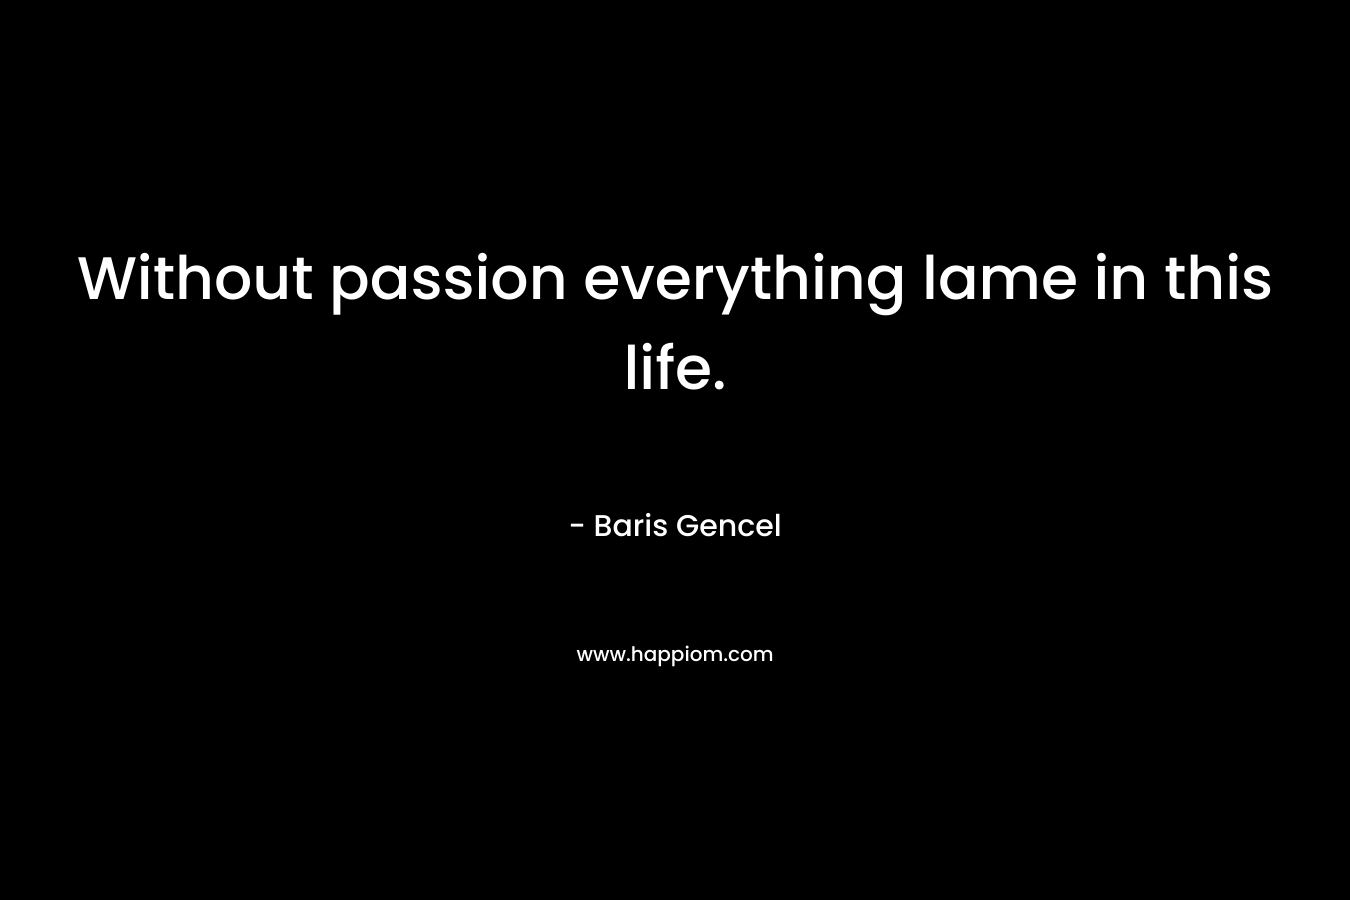 Without passion everything lame in this life.